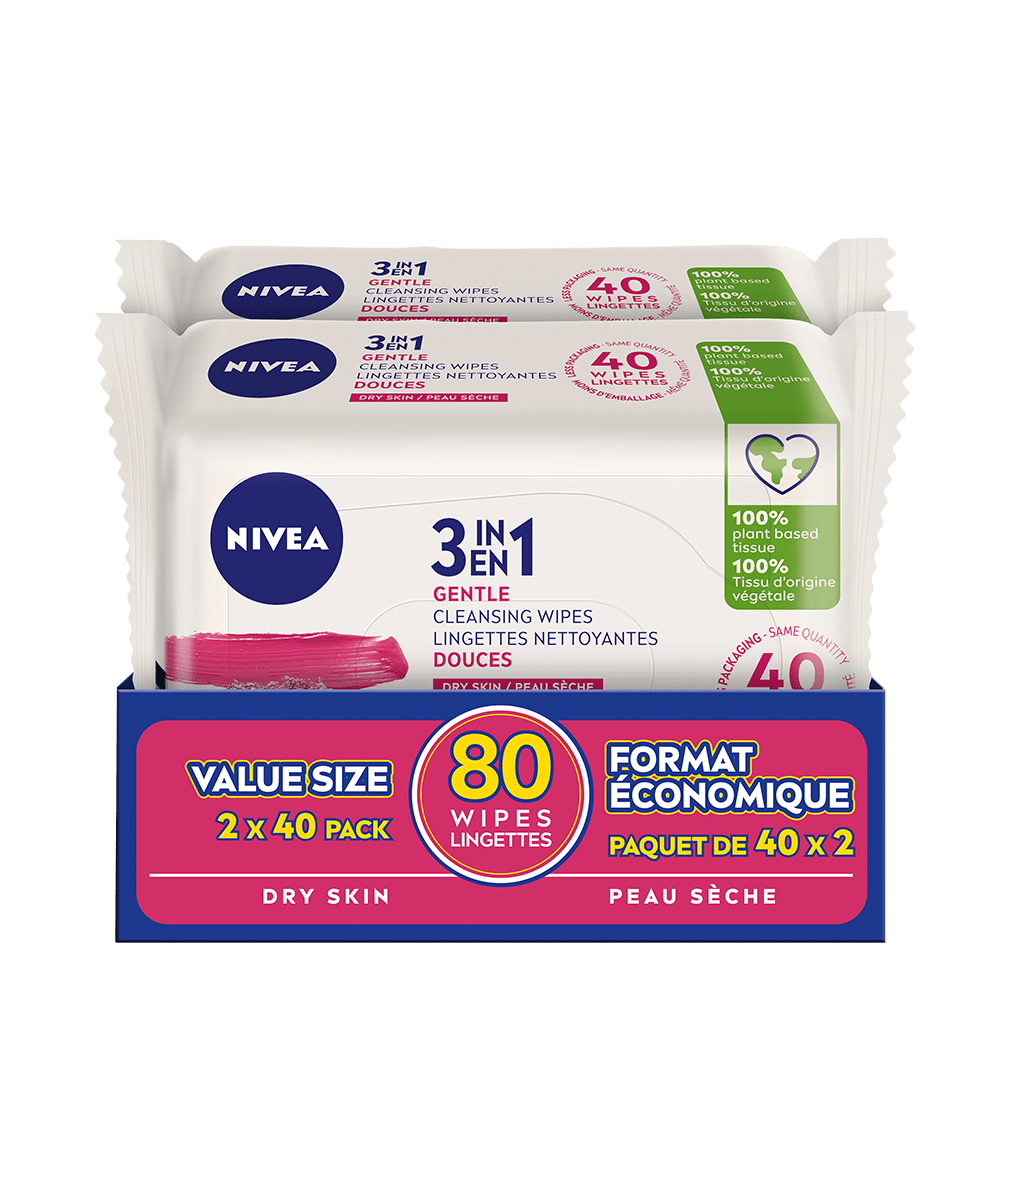 3-IN-1 BIODEGRADABLE CLEANSING WIPES duo